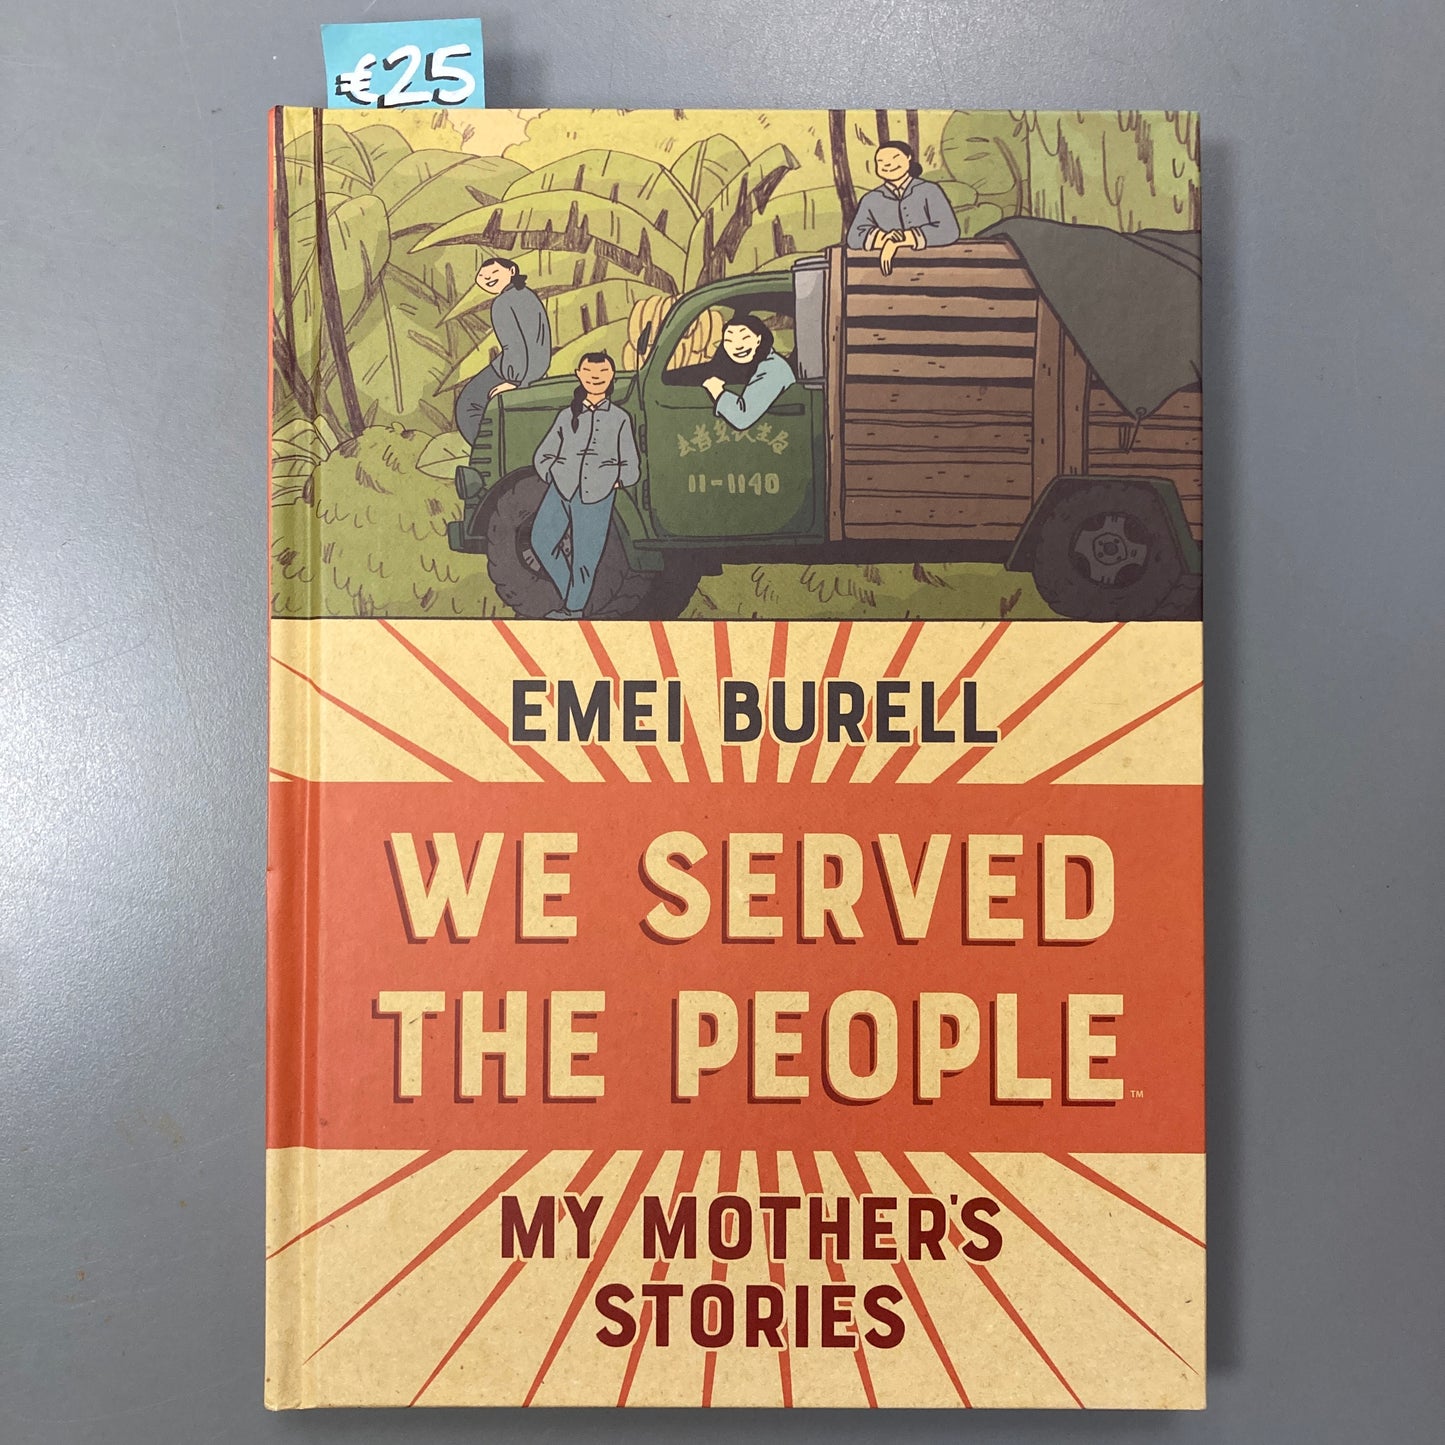 We Served the People: My Mother's Stories